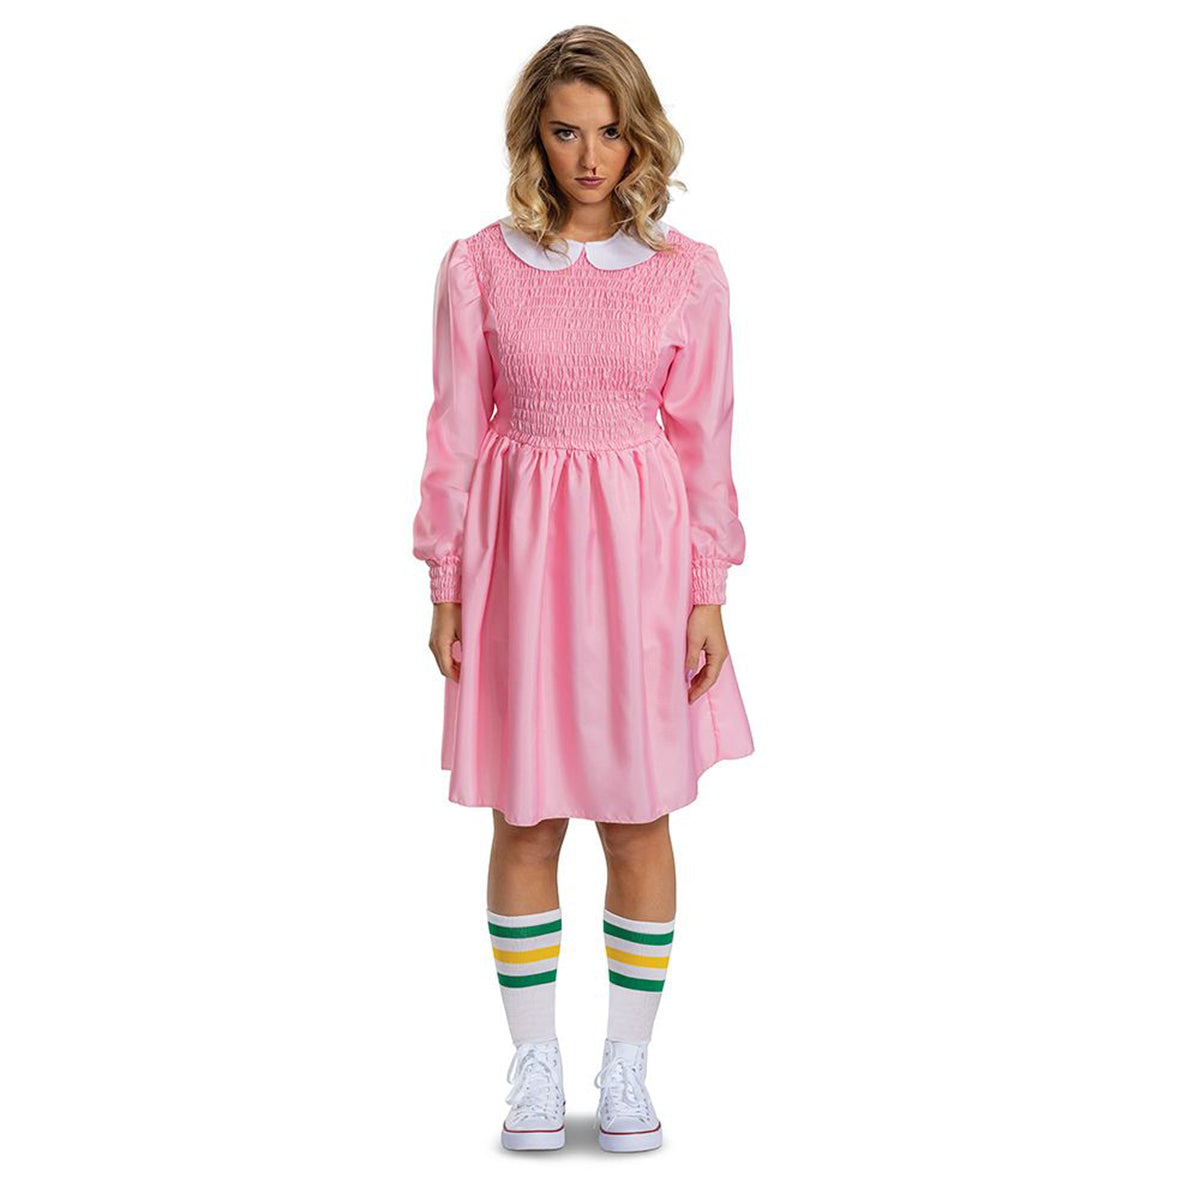 DISGUISE (TOY-SPORT) Costumes Stranger Things Eleven Deluxe Costume for Adults, Pink Dress with White Socks